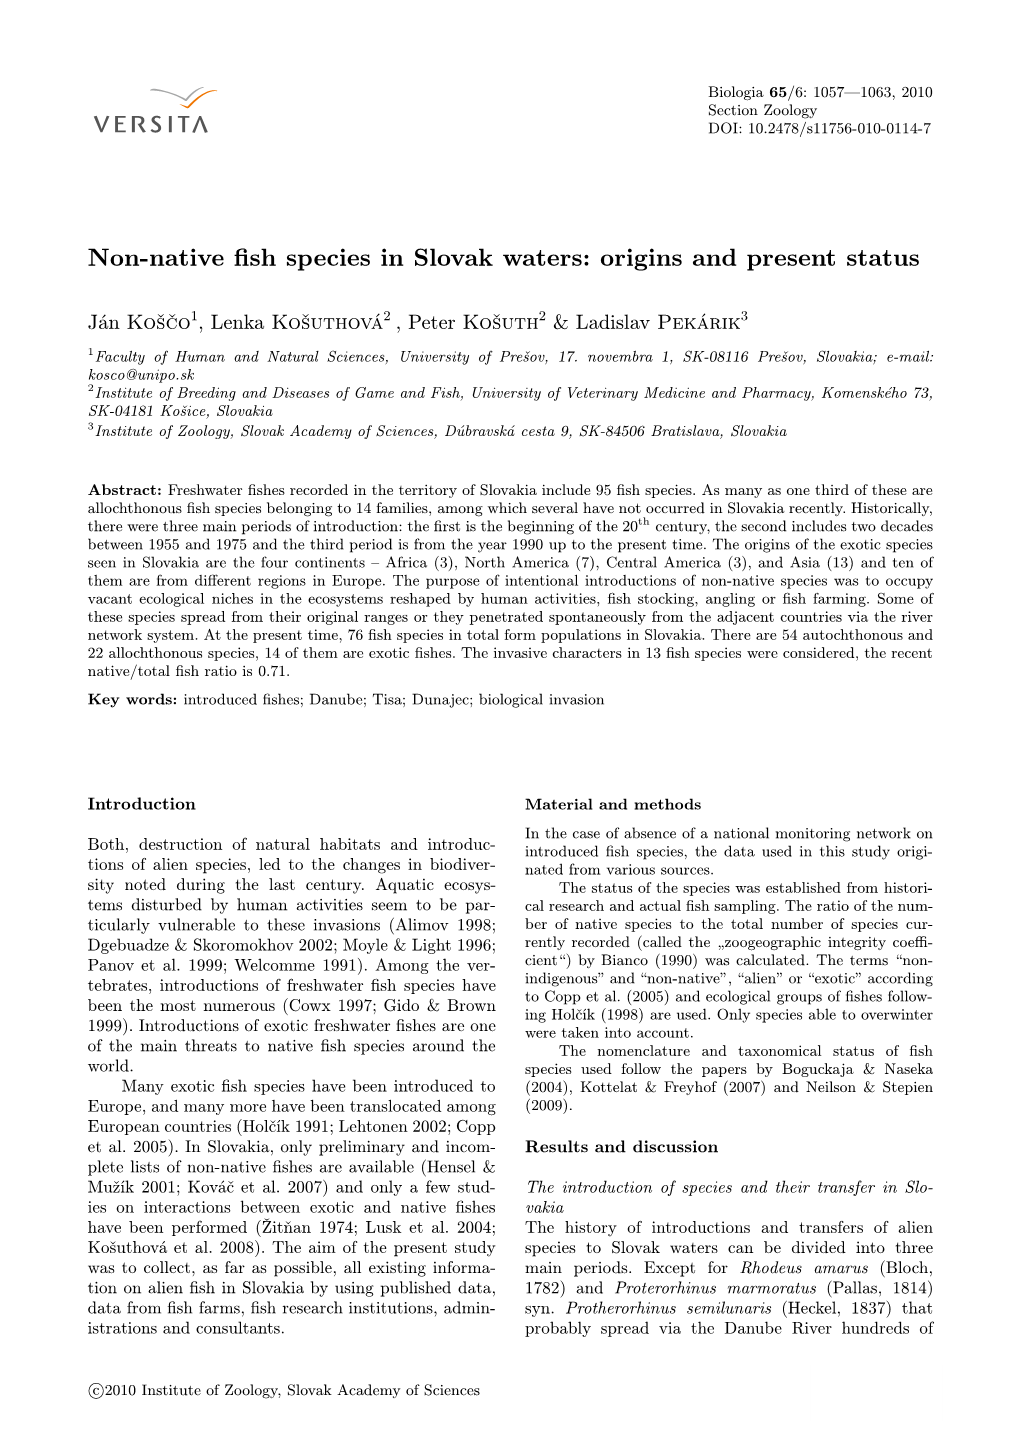 Non-Native Fish Species in Slovak Waters